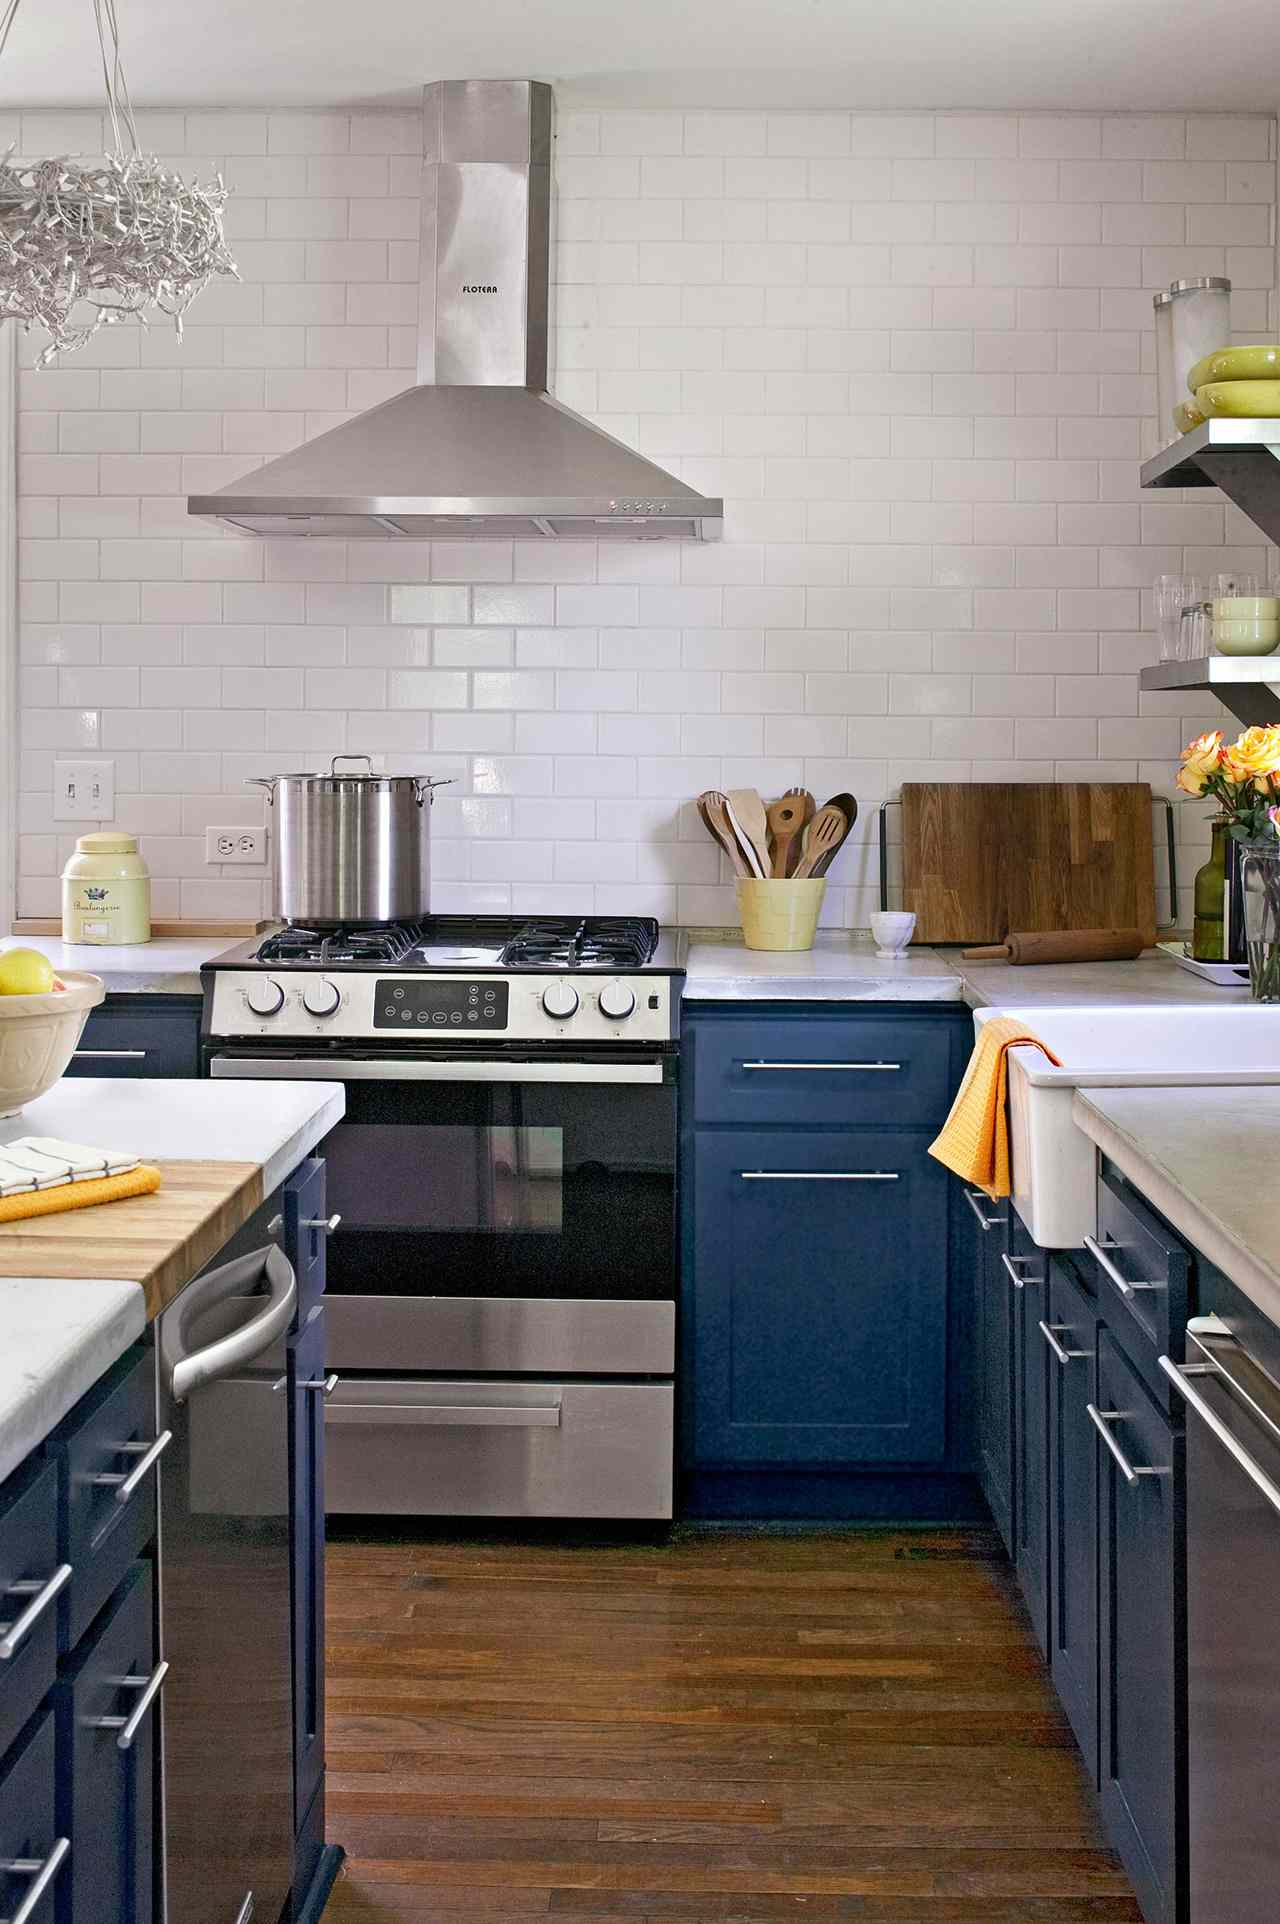 Modern style kitchen with blue cabinetry